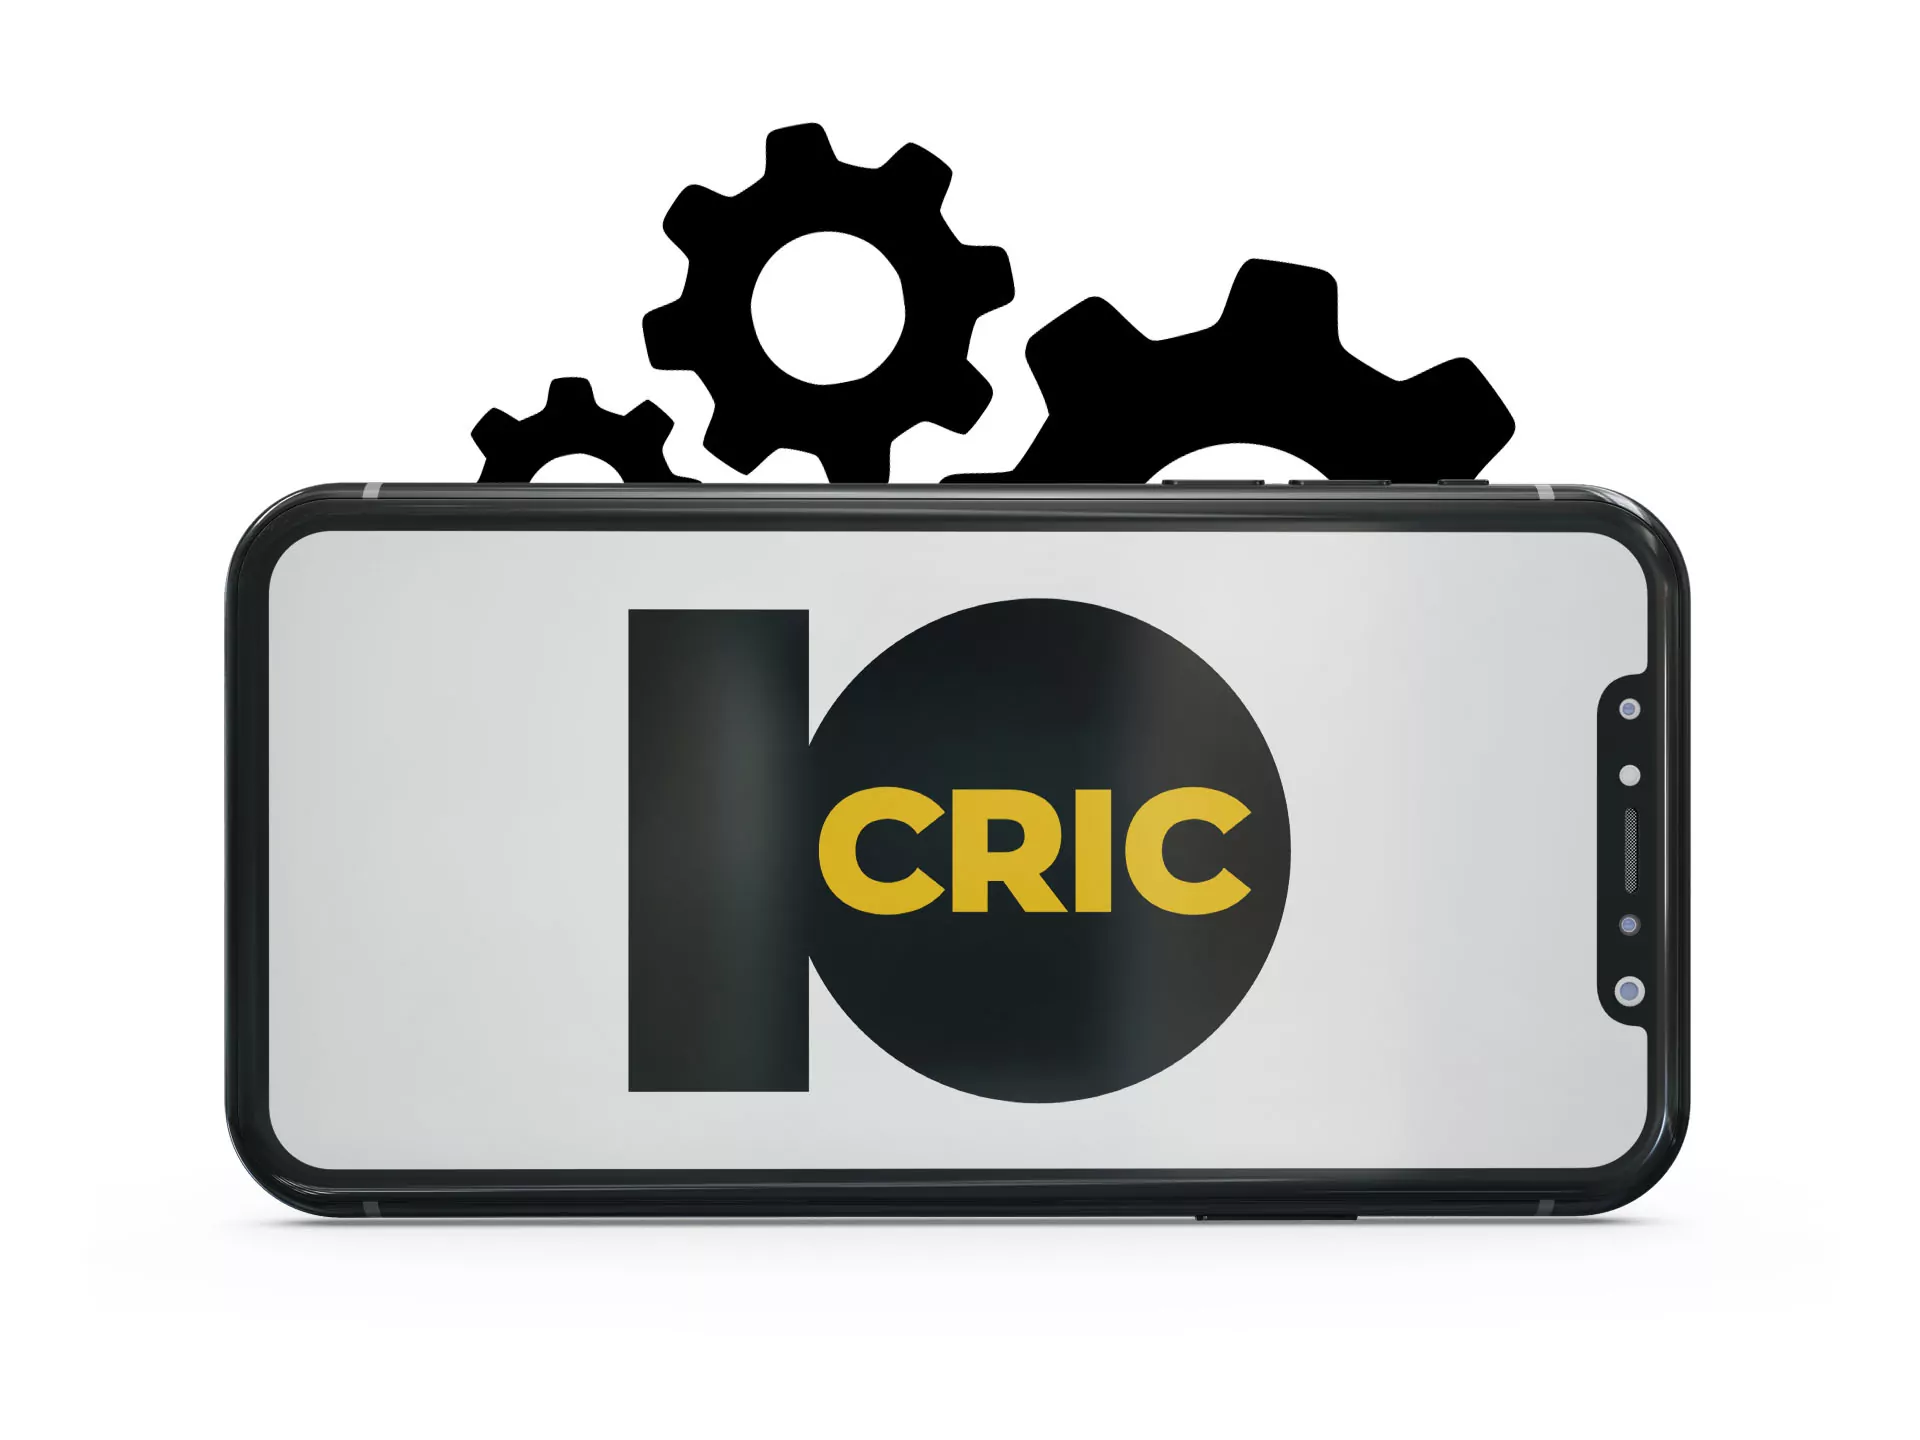 You can use all of the 10Cric app features.